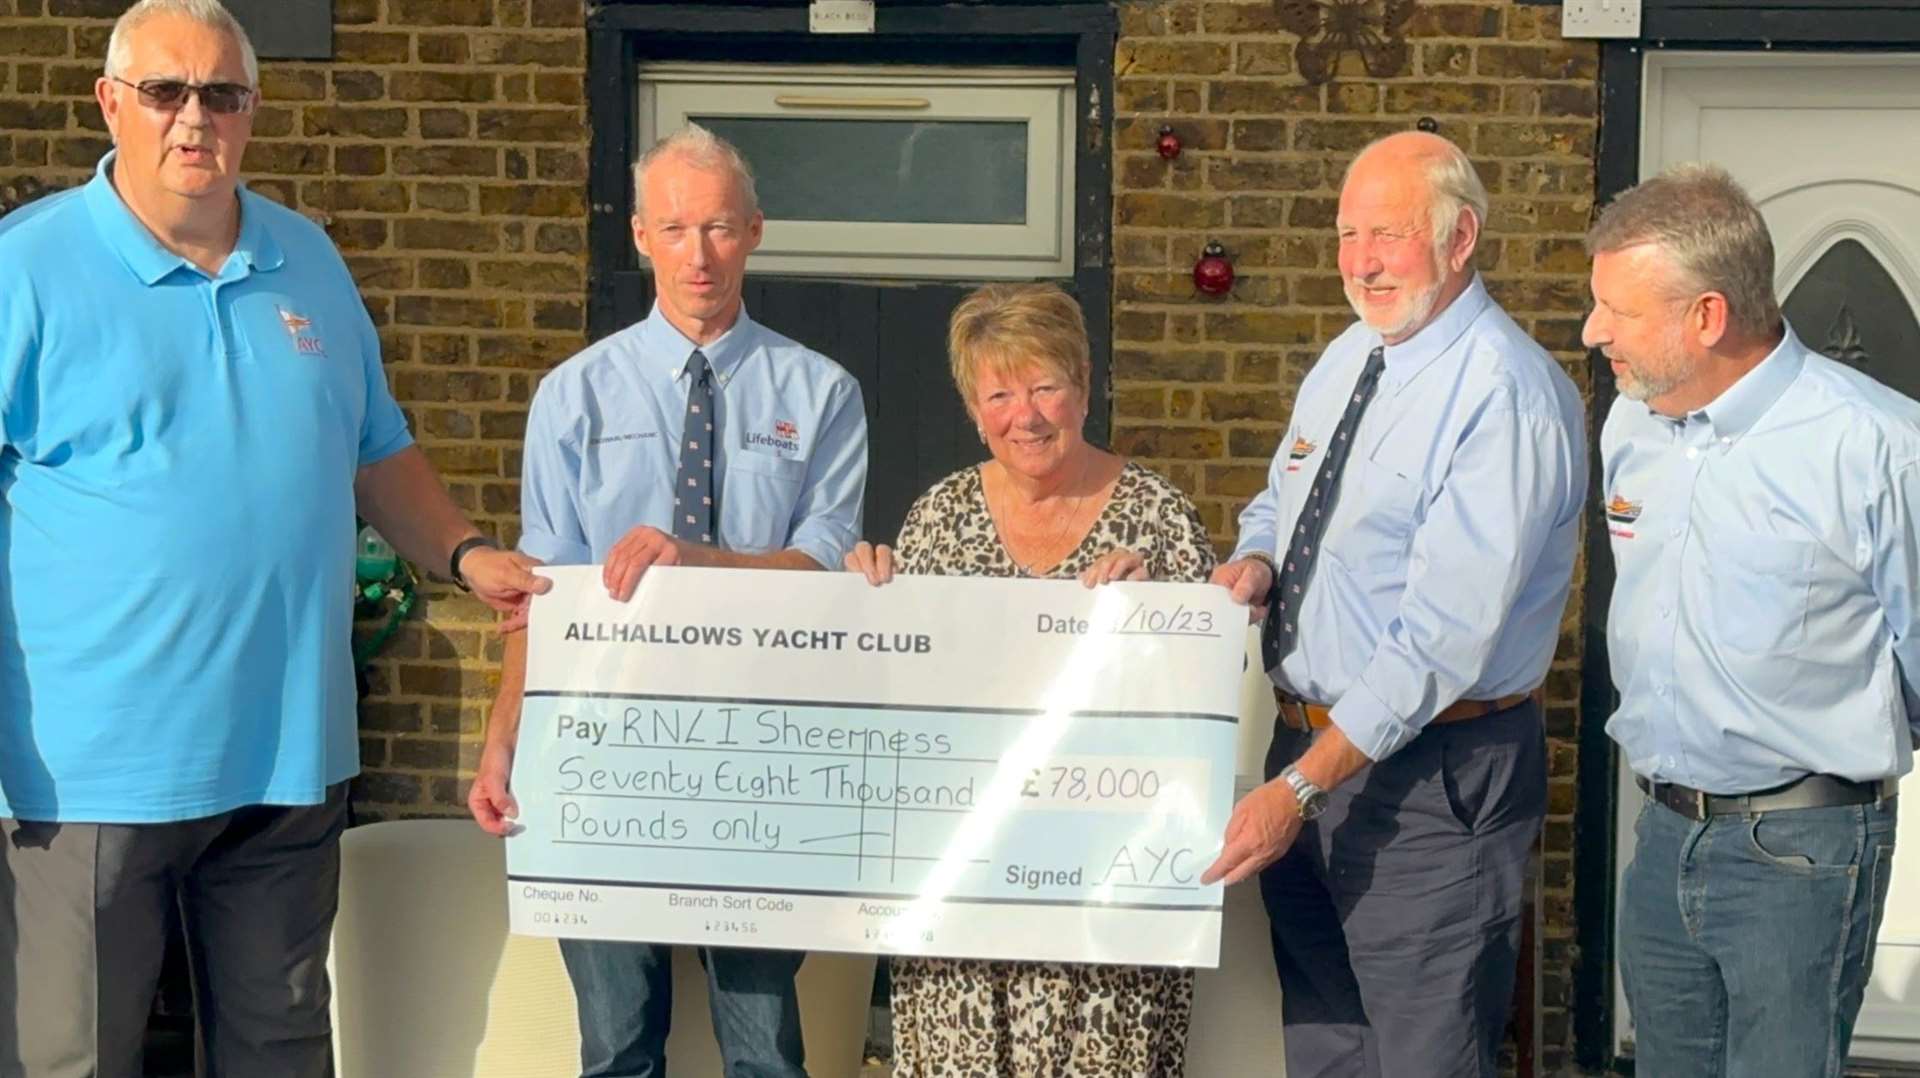 From left, Allhallows Yacht Club president Andrew Vincent, Paul Jarvis, Cheryl Frame, Robin Castle and Nigel Budden. Picture: Sheerness RNLI